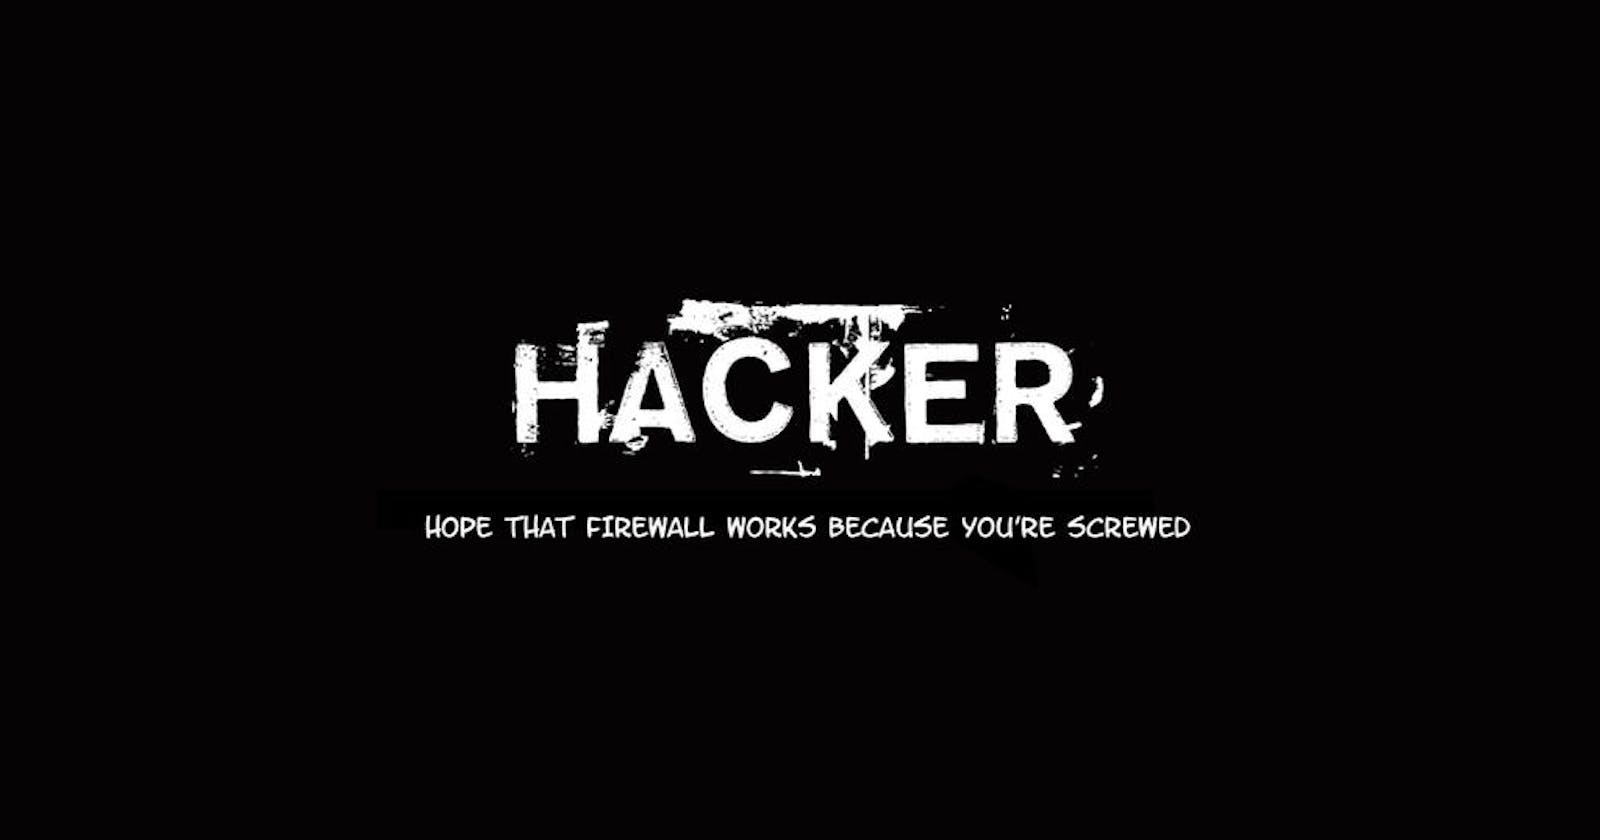 "In the mind of a Hacker"